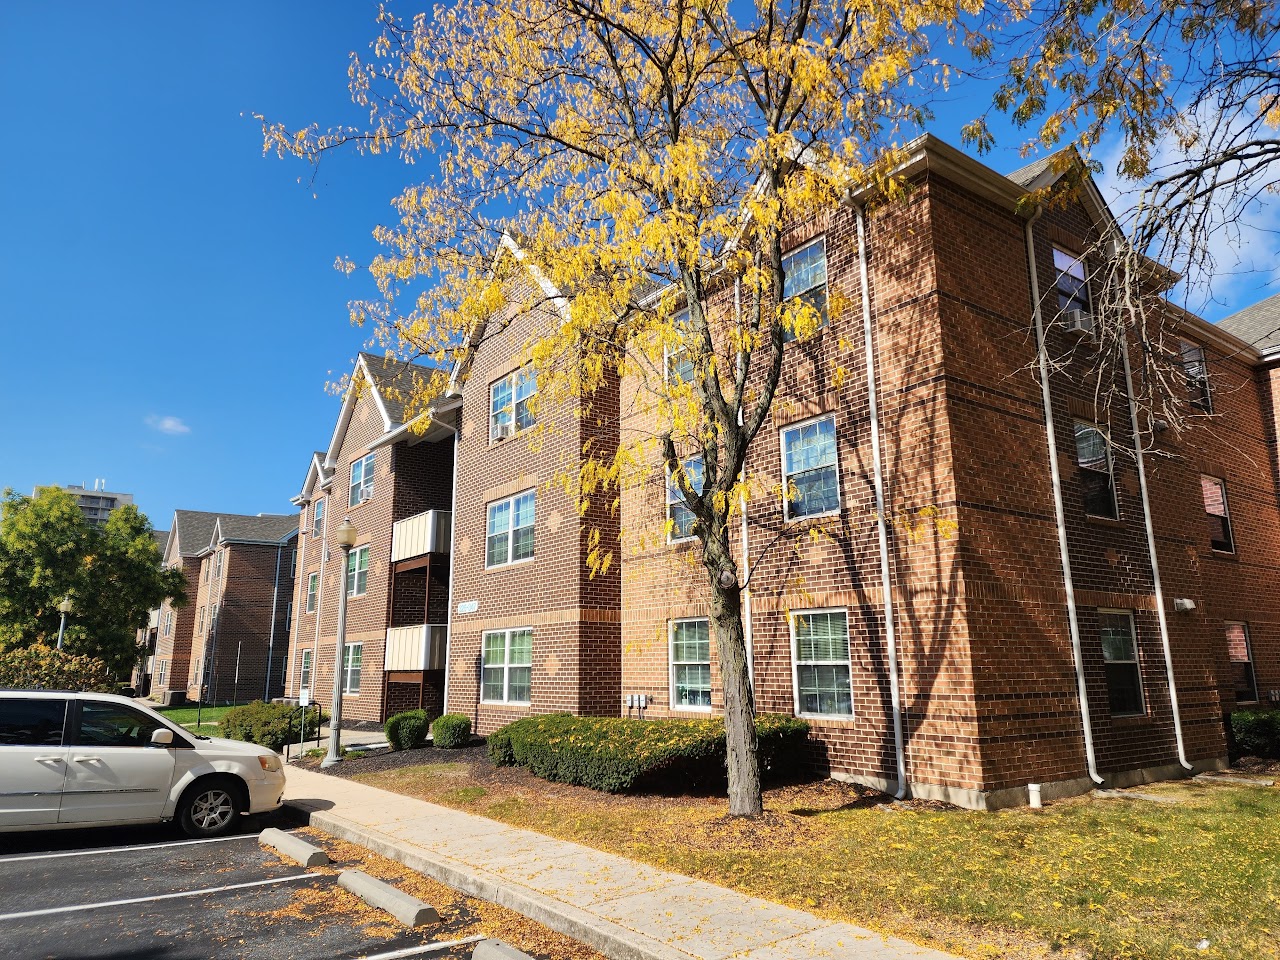 Photo of COURT AT WASHINGTON SQUARE. Affordable housing located at 225 MARY STREET HARRISBURG, PA 17104